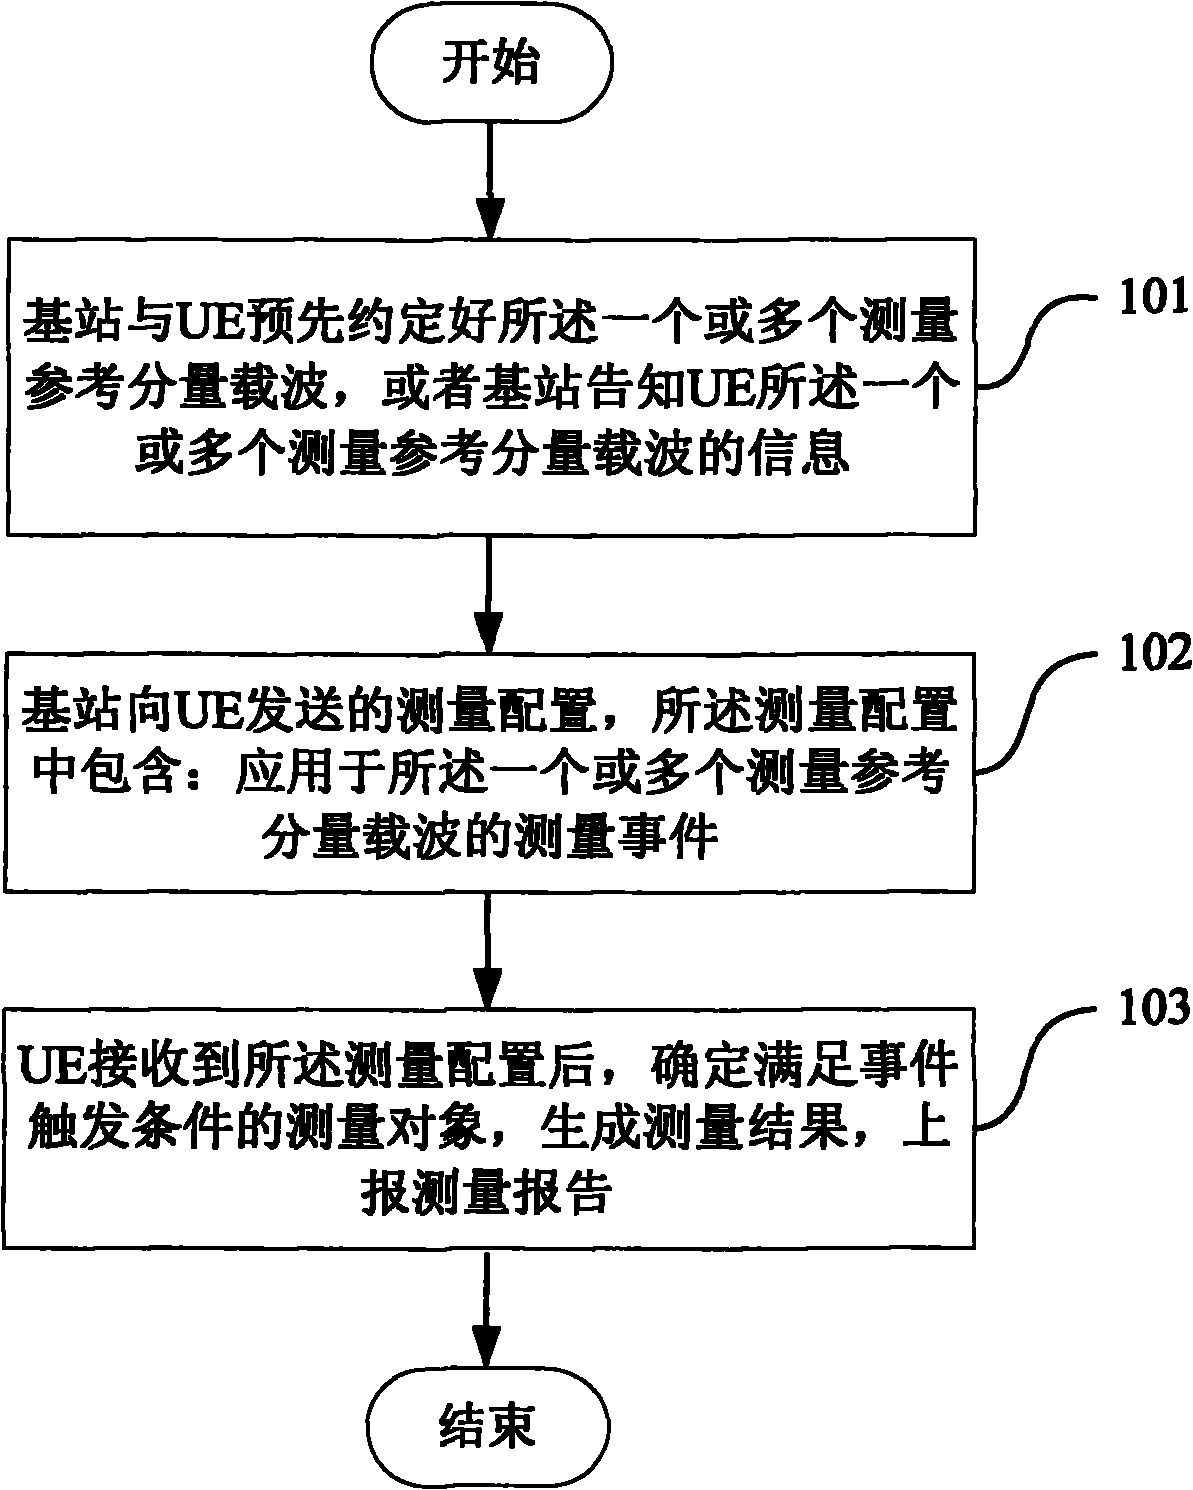 Method for processing measurement configuration in carrier aggregation